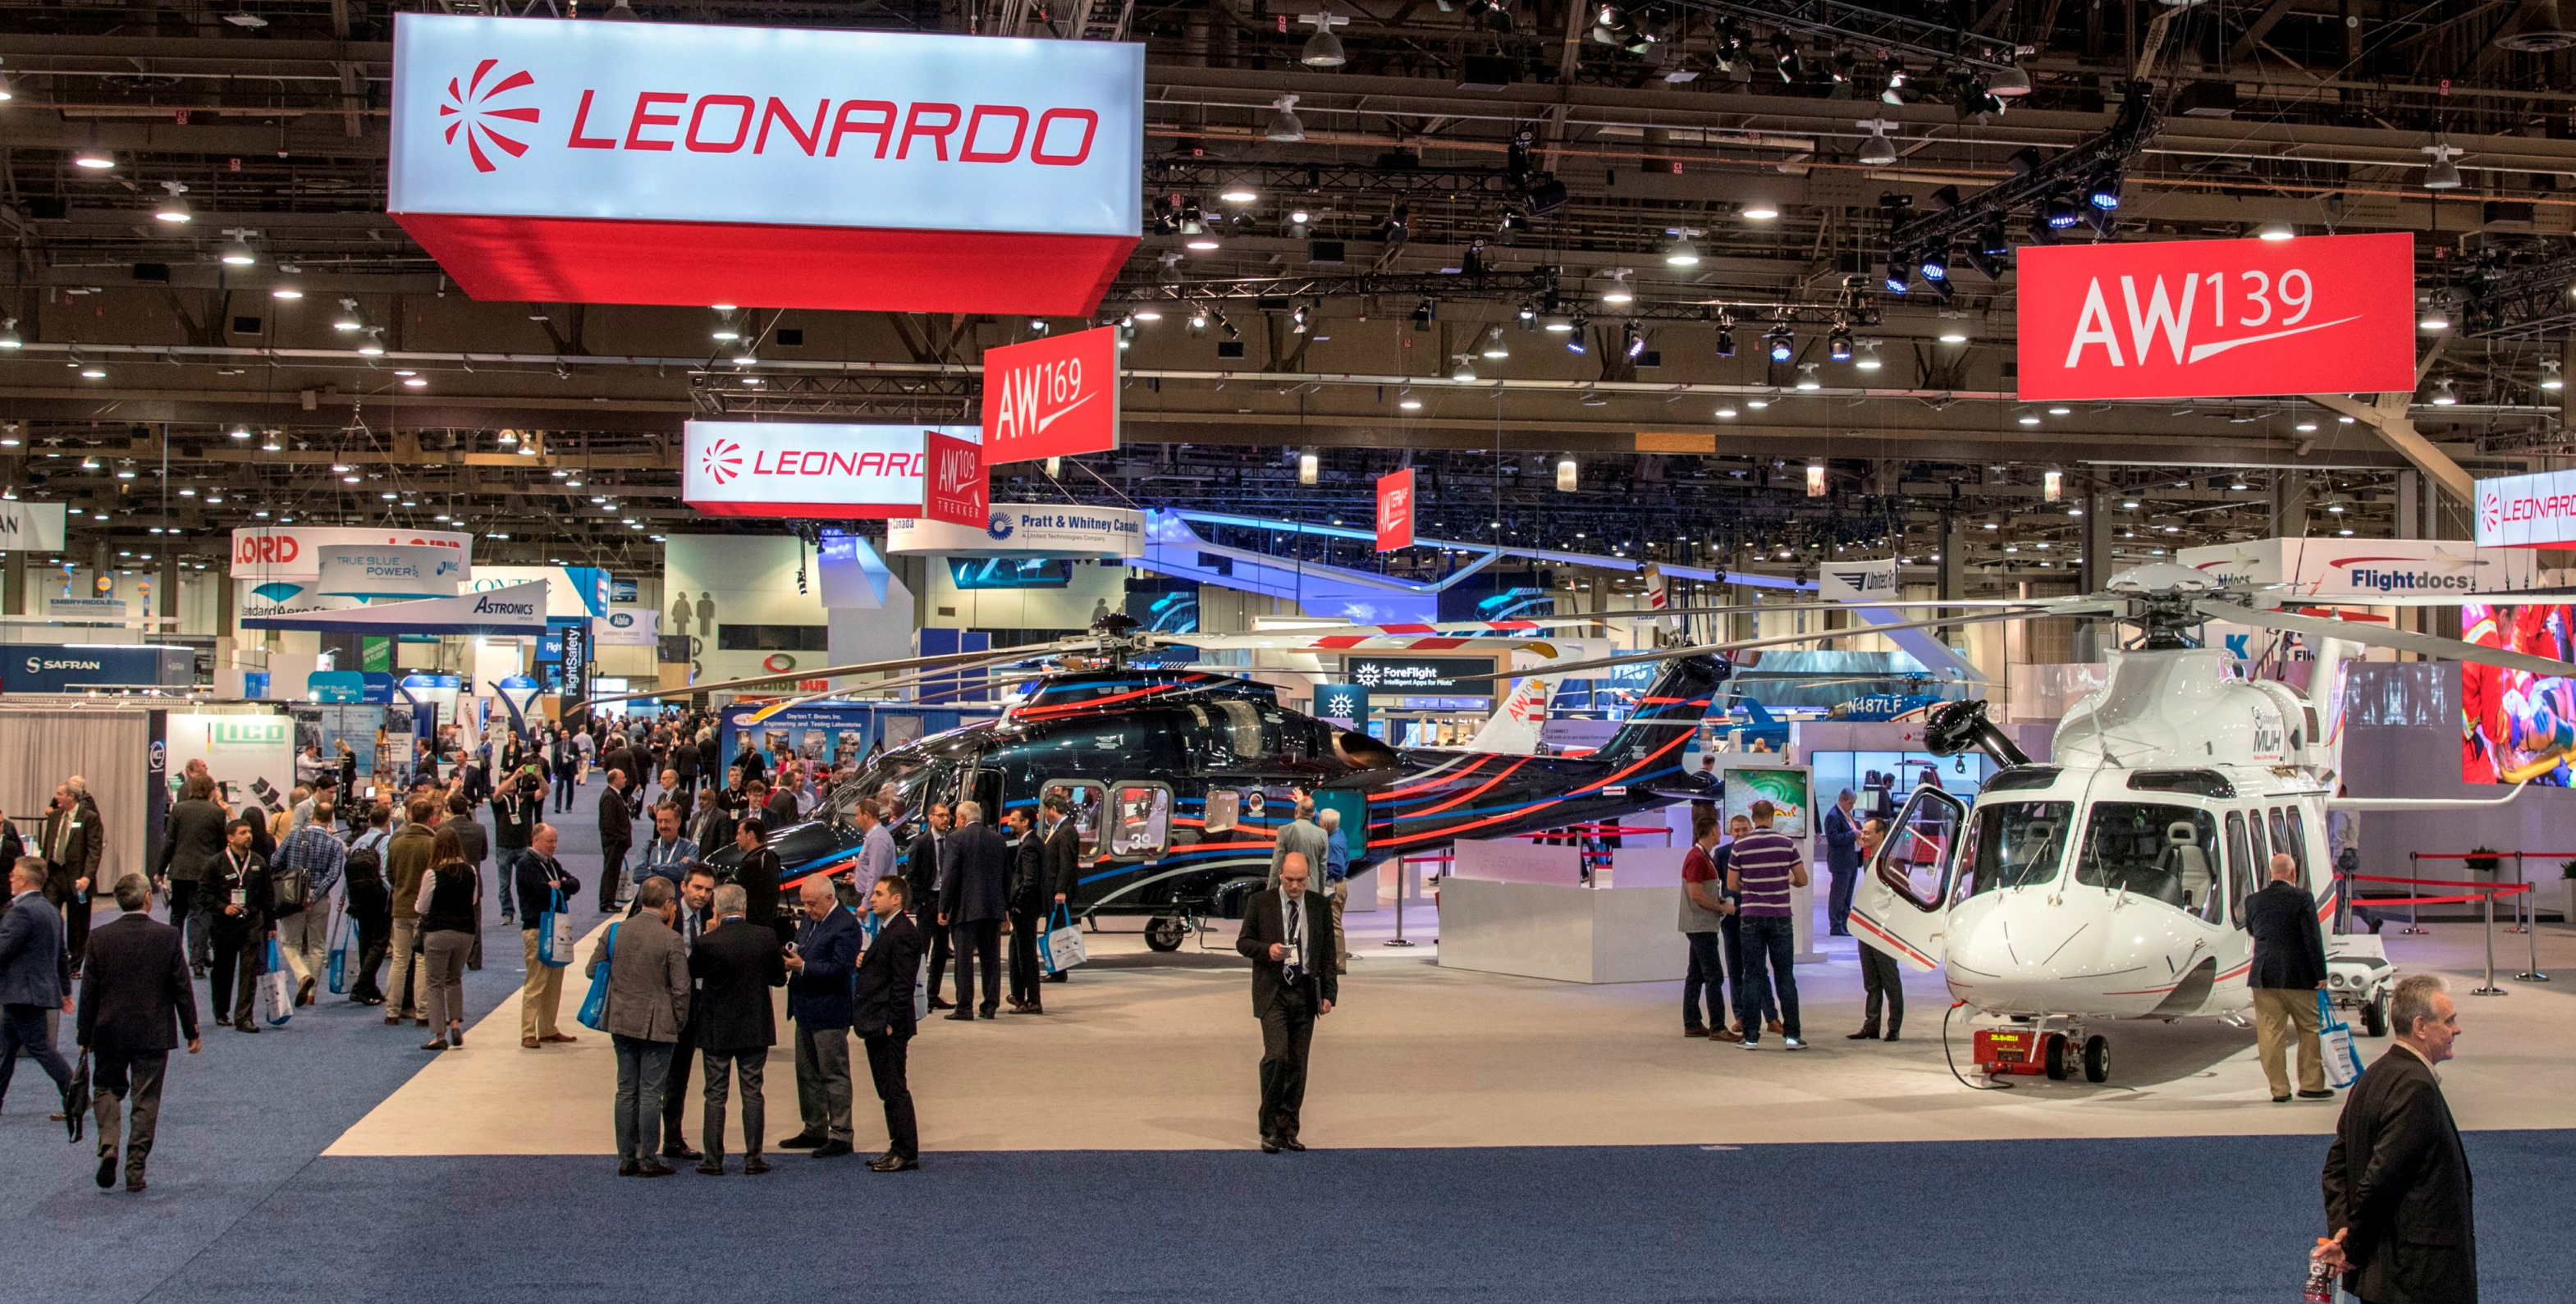 The contracts signed with Leonardo at Heli-Expo, valued at almost $170 million, include a mix of AW119Kx, AW109 GrandNew, AW109 Trekker, AW169, AW139 and AW189 helicopters. Leonardo Helicopters Photo